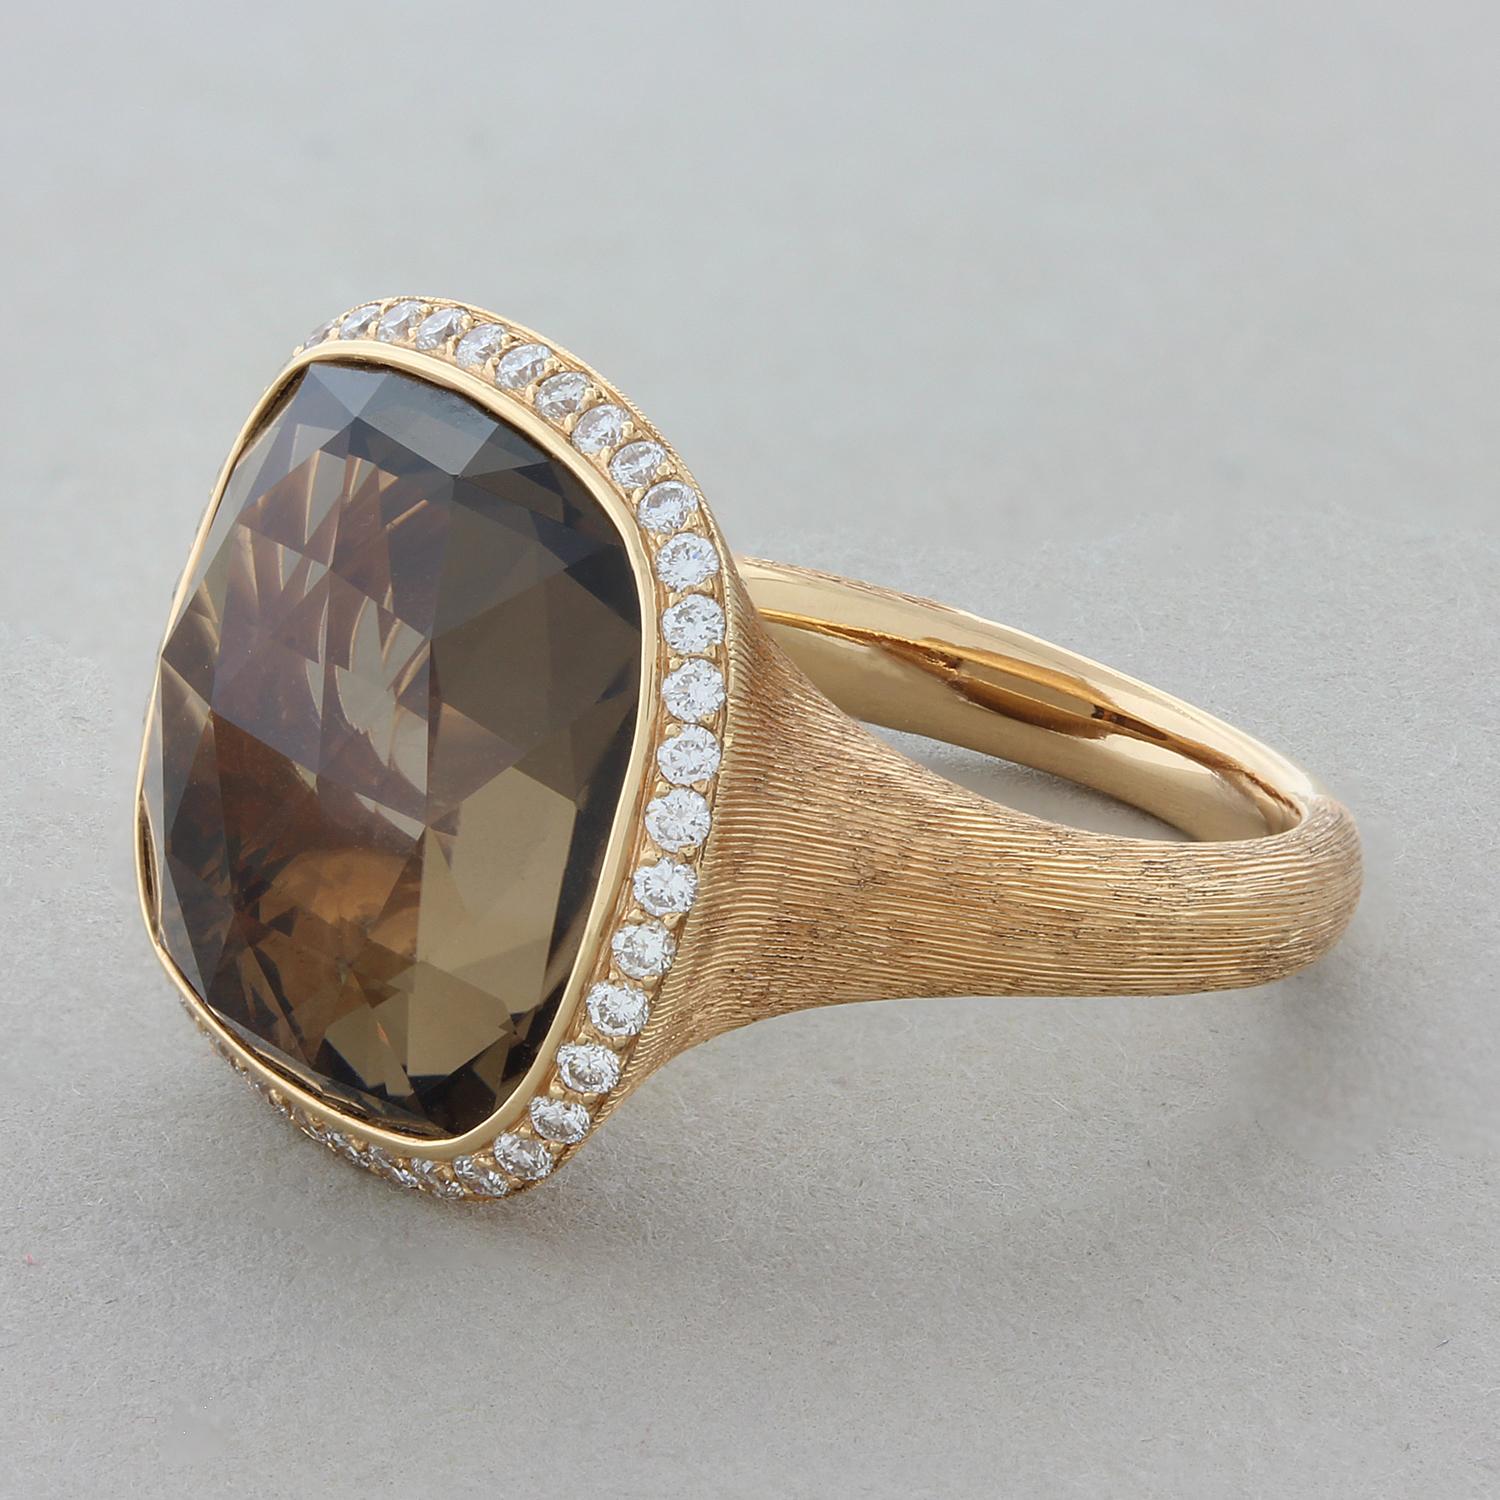 An everyday ring featuring a 10.72 carat cushion cut checkerboard smoky quartz gemstone. It is haloed by 0.38 carats of round brilliant cut diamonds set in 18K rose gold with a brushed finish.

Ring Size 6.25 (Sizable)
